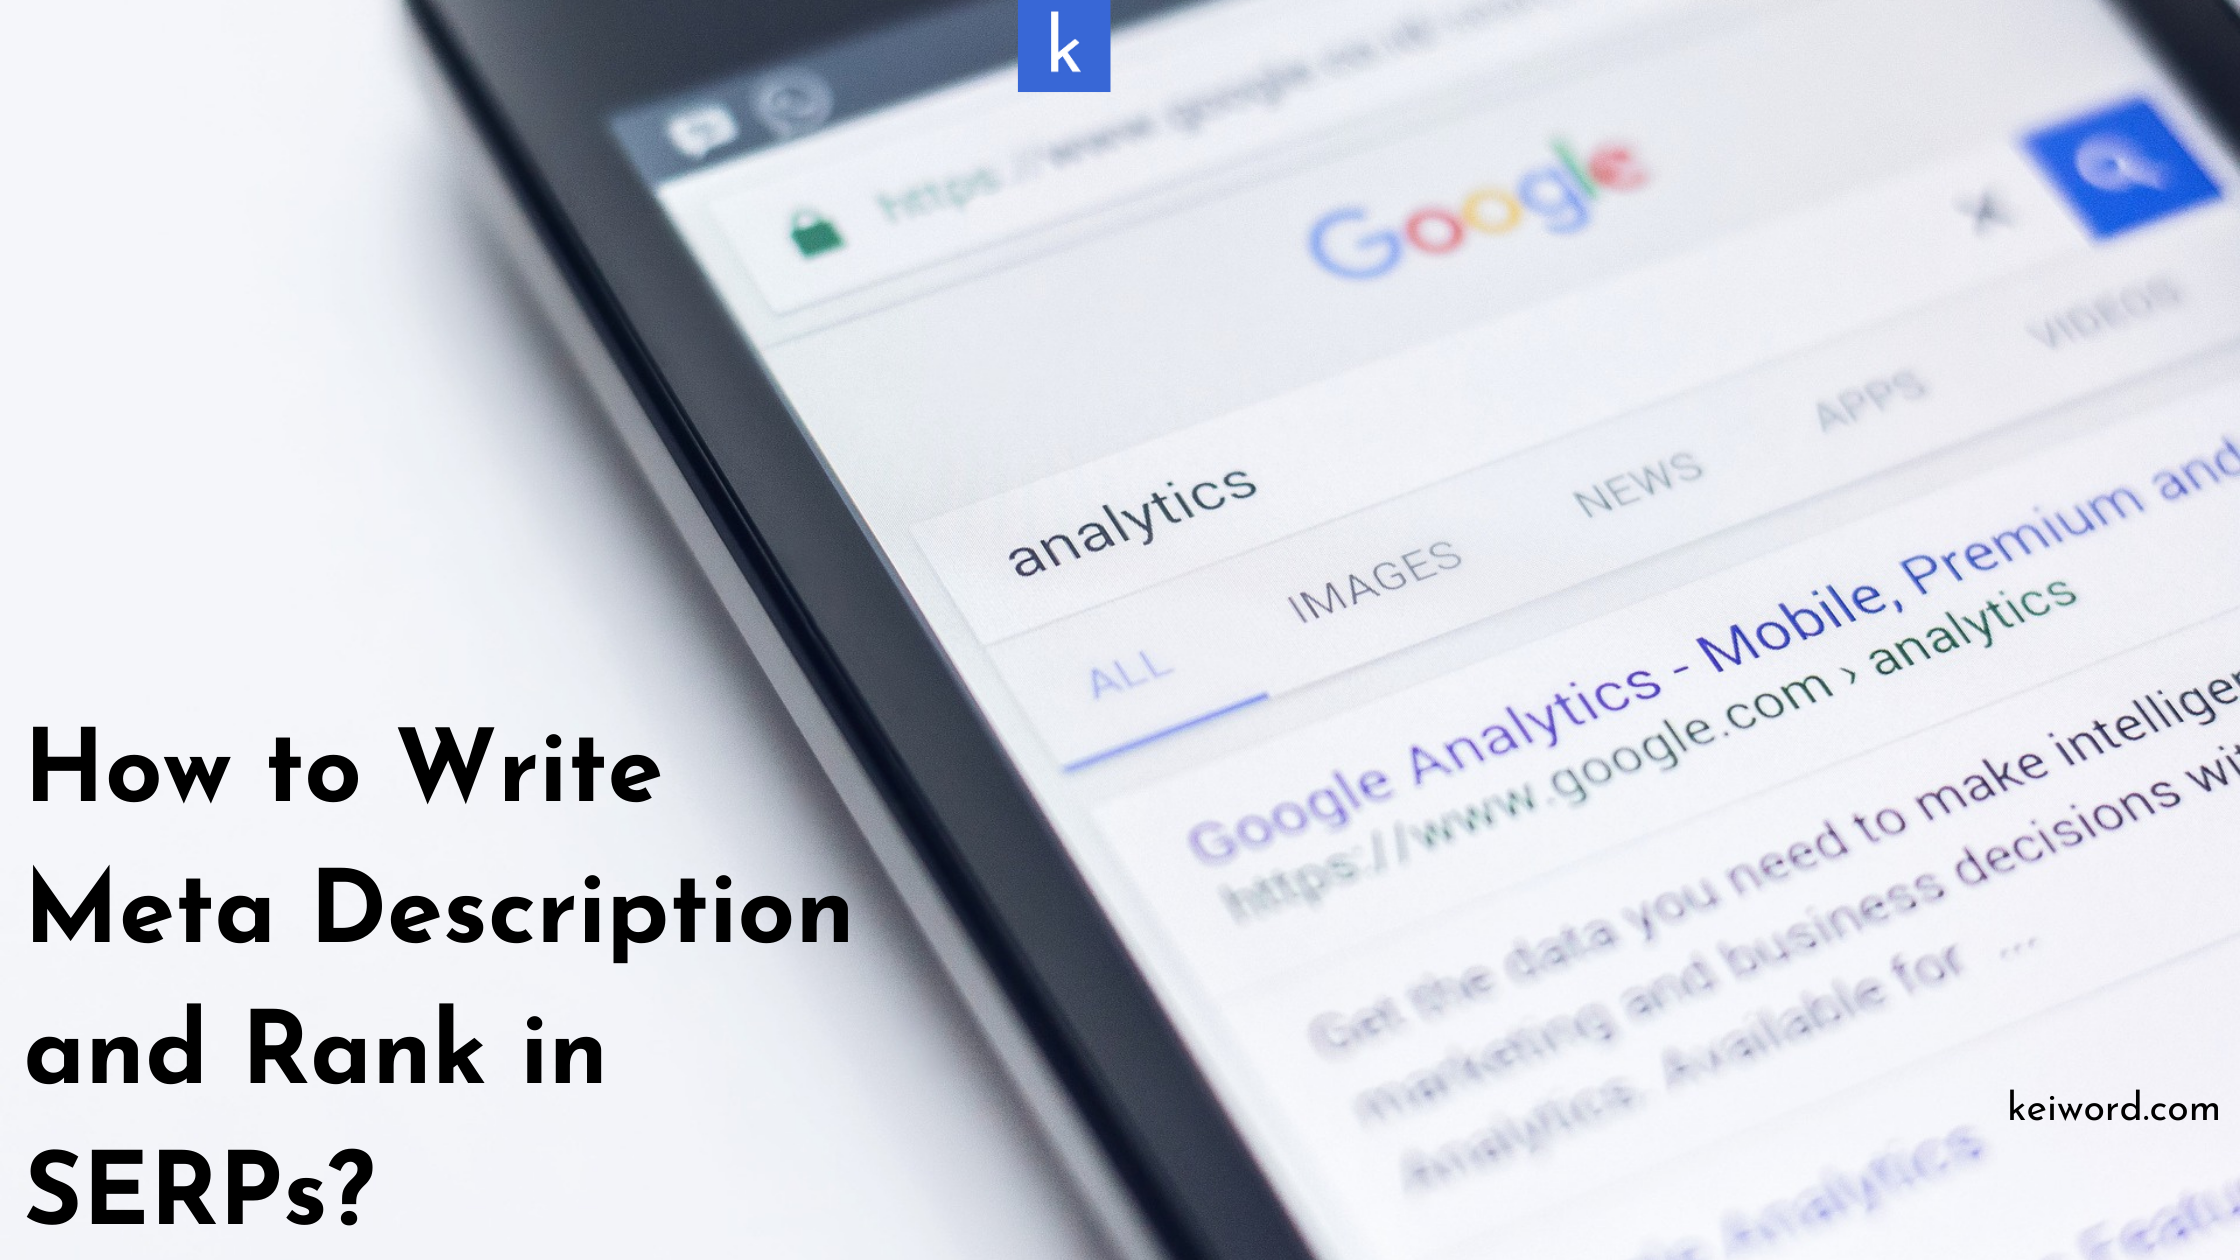 How to Write Meta Description and Rank in SERPs?